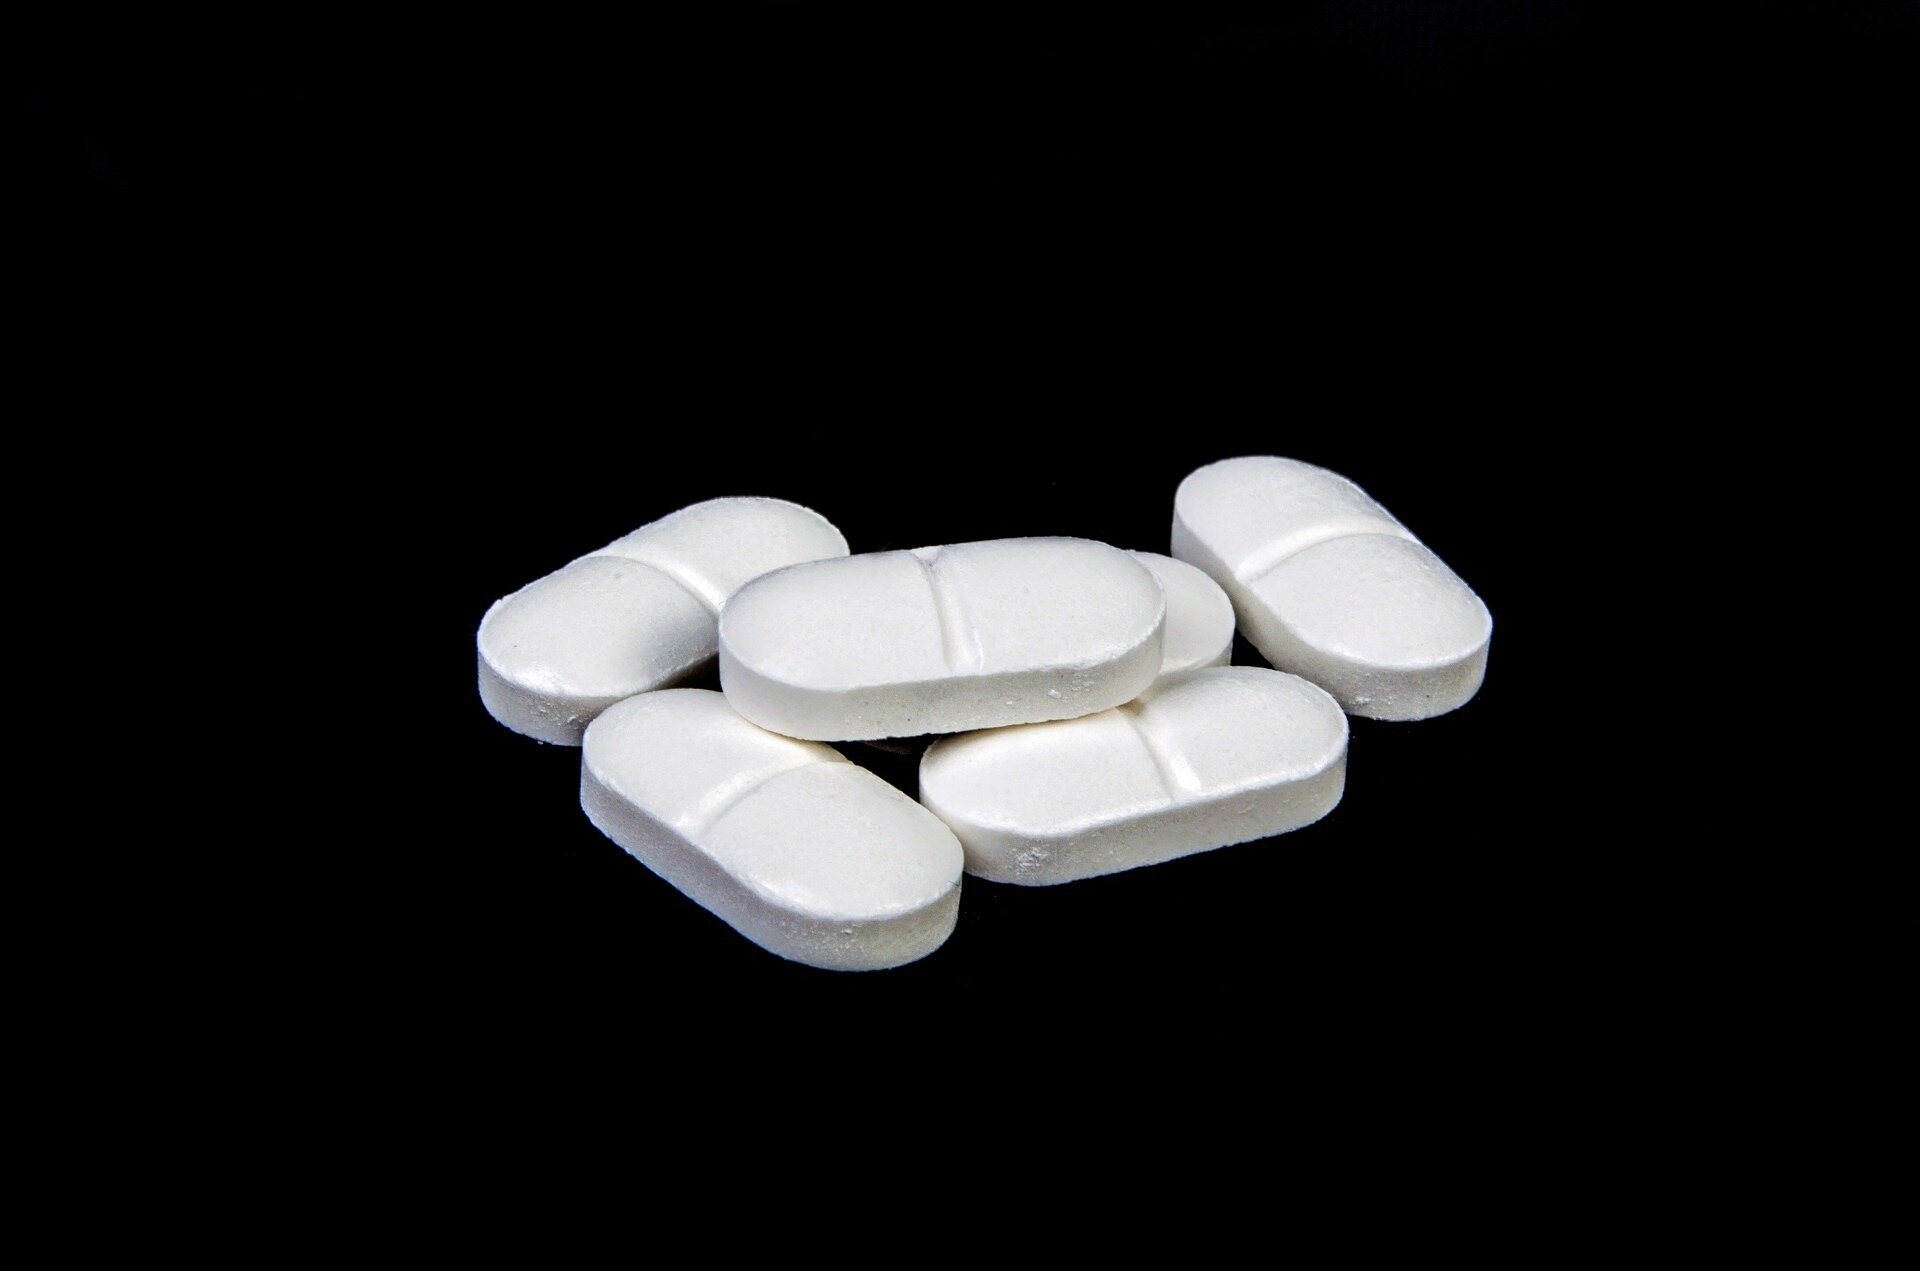 Study shows that low-dose aspirin associated with a 15% lower risk of developing diabetes in people aged over 65 years